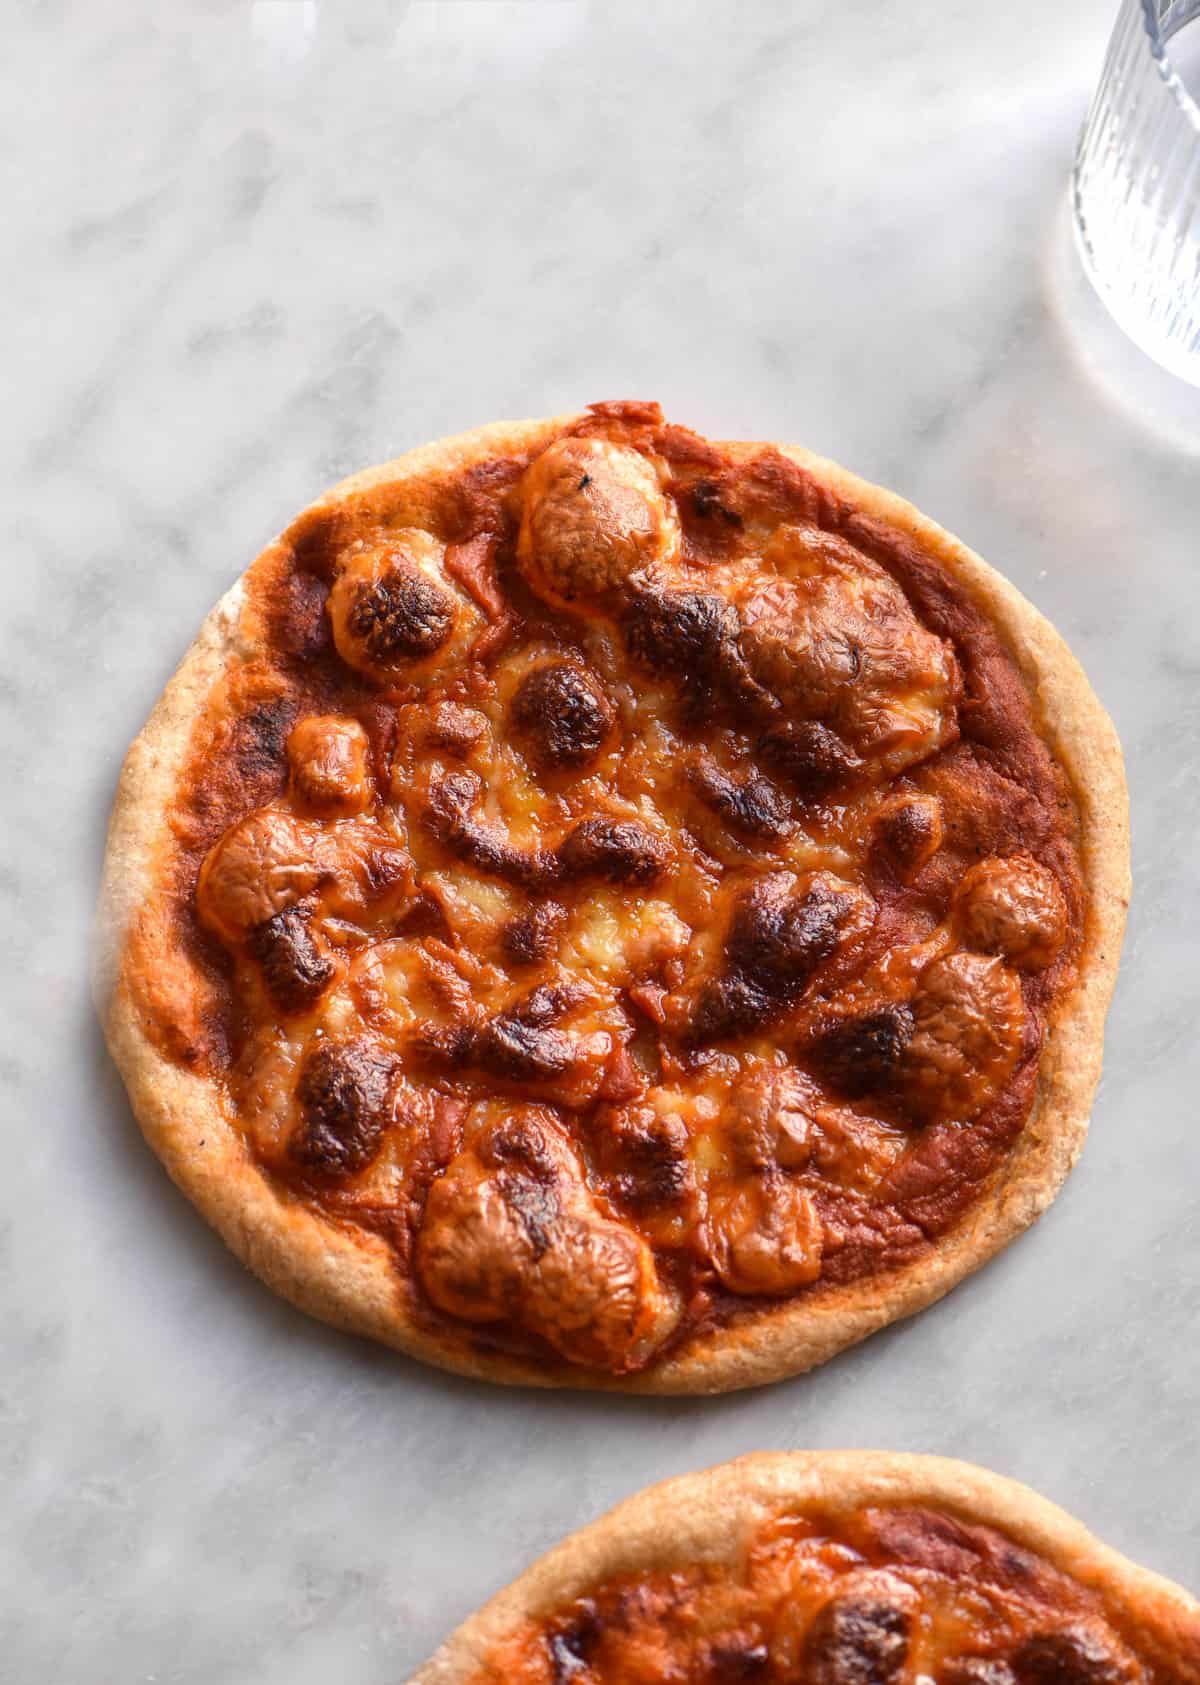 A close up of a gluten free sourdough pizza. The pizza is topped with margherita style toppings - red pizza sauce and bubbly browned mozzarella. It is set against a white marble backdrop